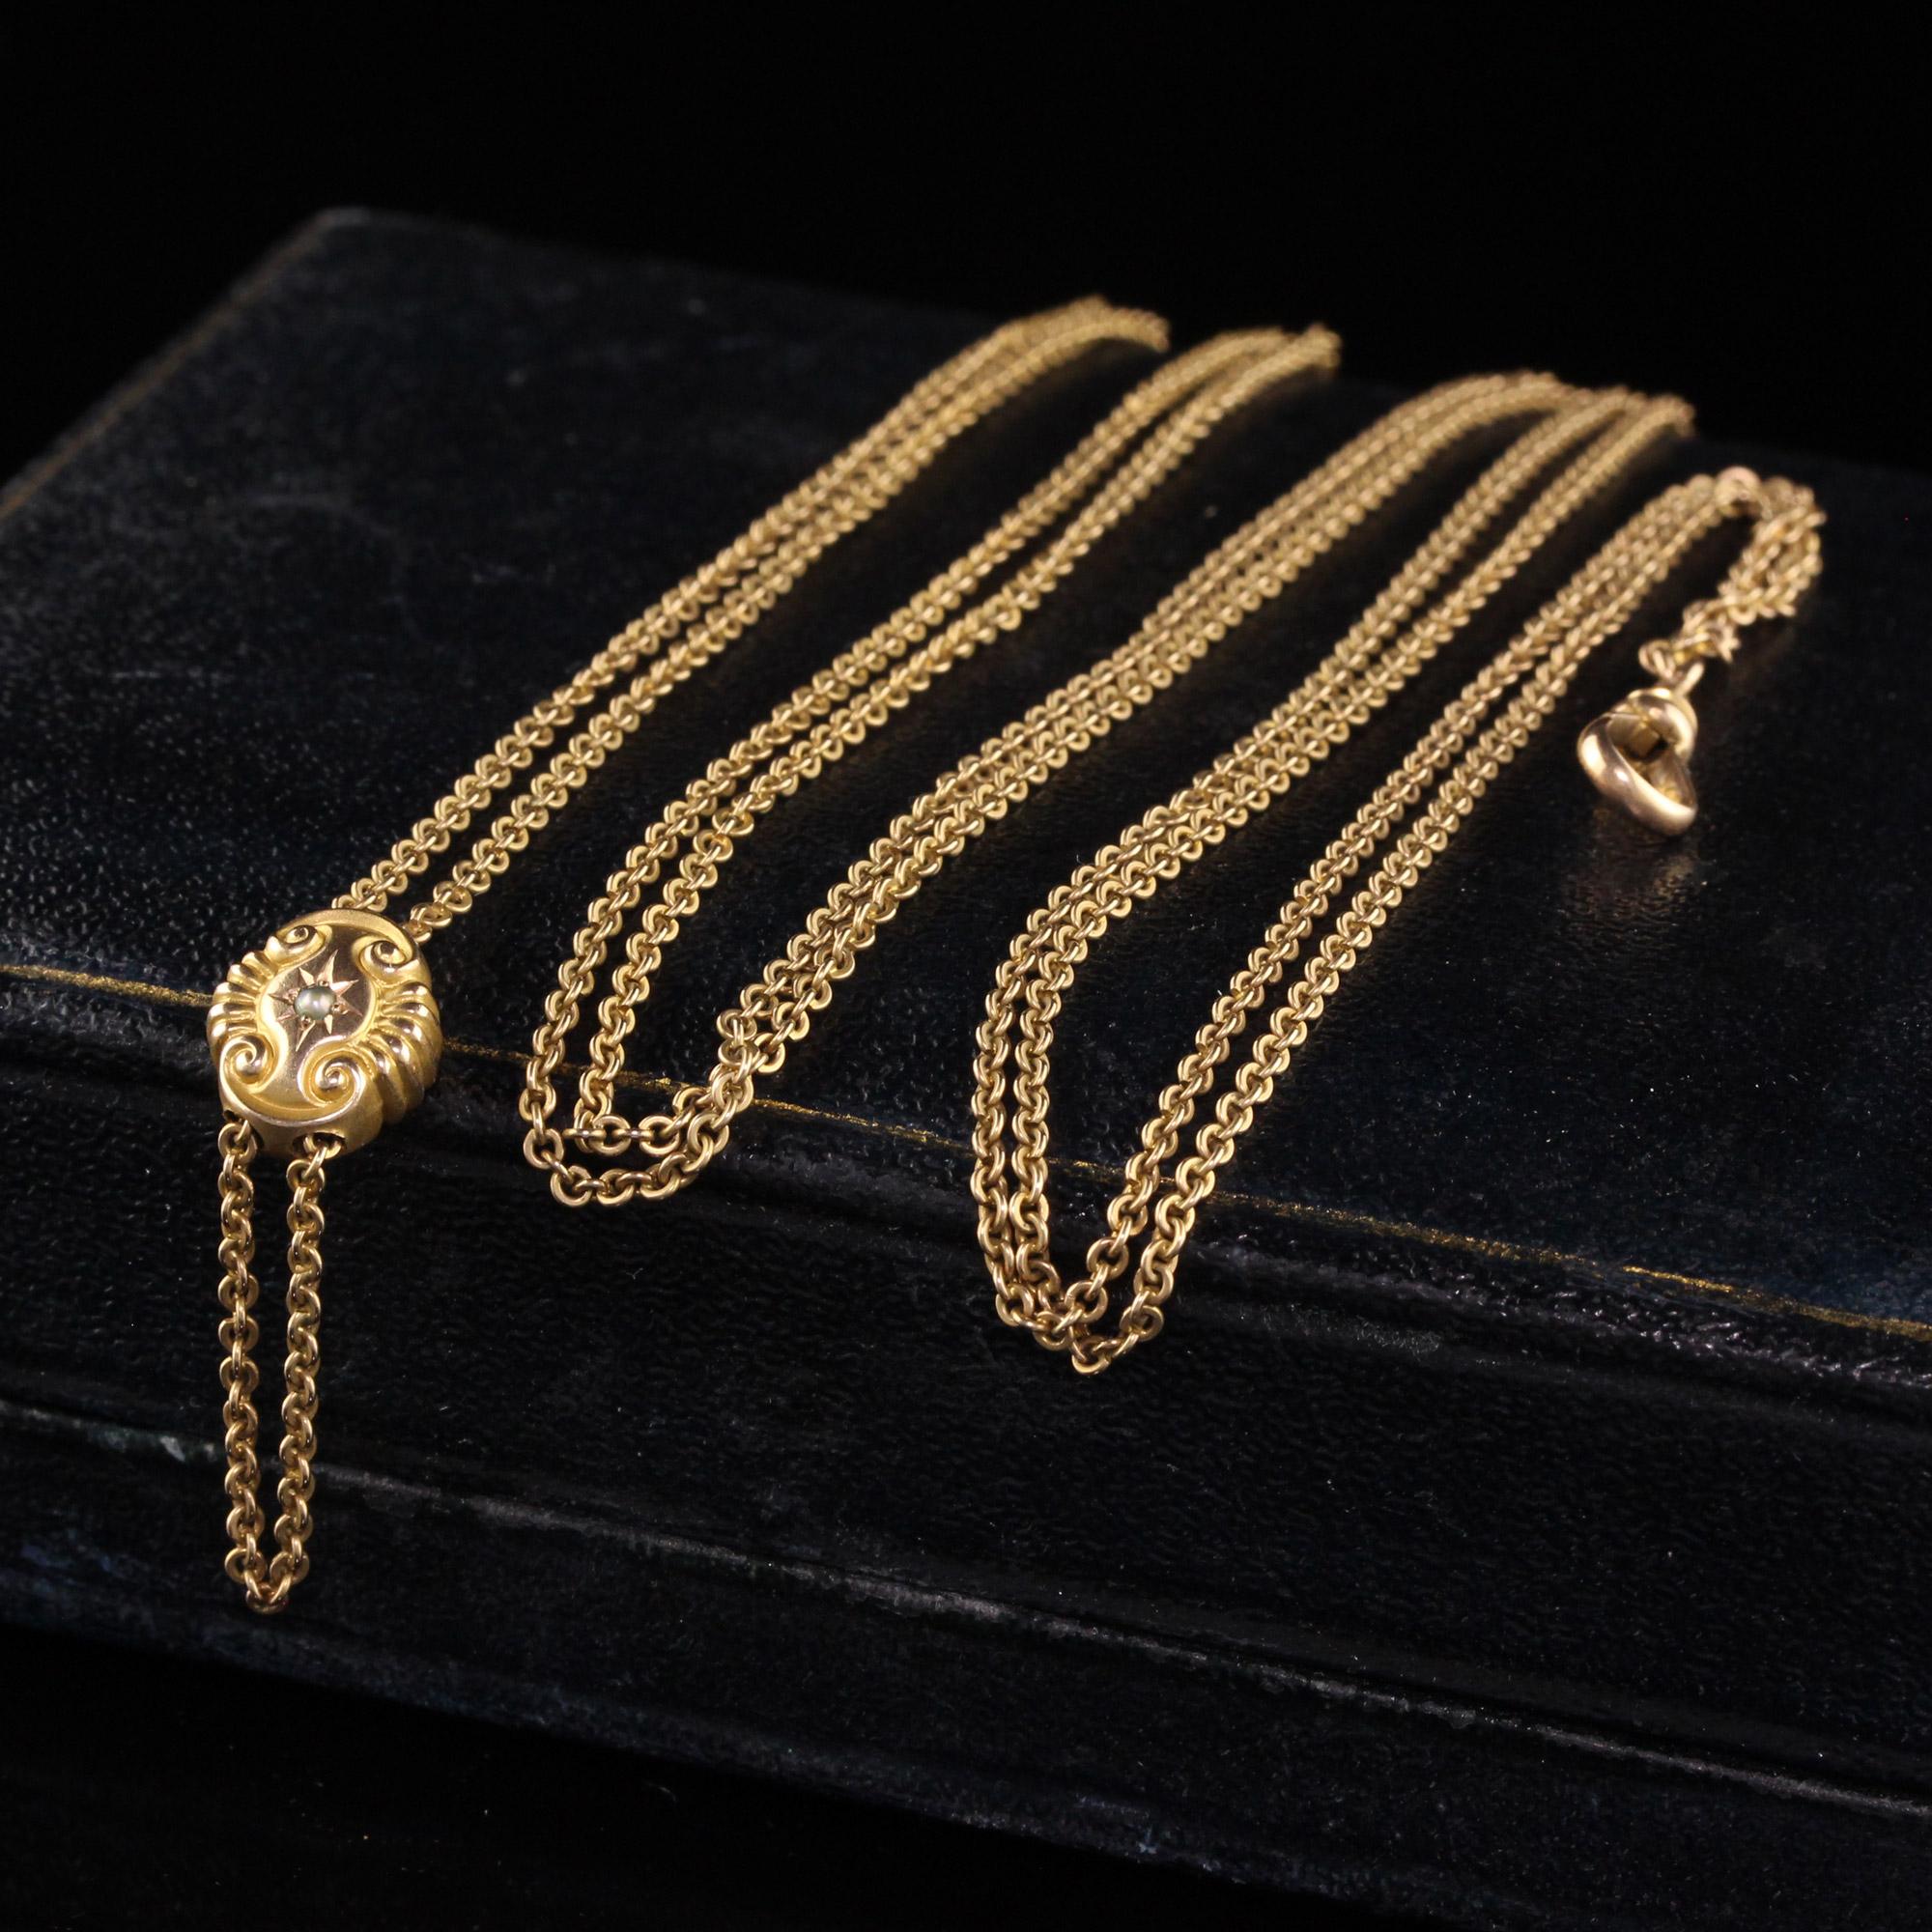 Beautiful Antique Victorian 14K Yellow Gold Cable Link Chain Slider Necklace - 50 inches. This classic chain necklace is crafted in 14k yellow gold. The chain is made with a cable link and has a beautiful slider in the middle that can be adjusted